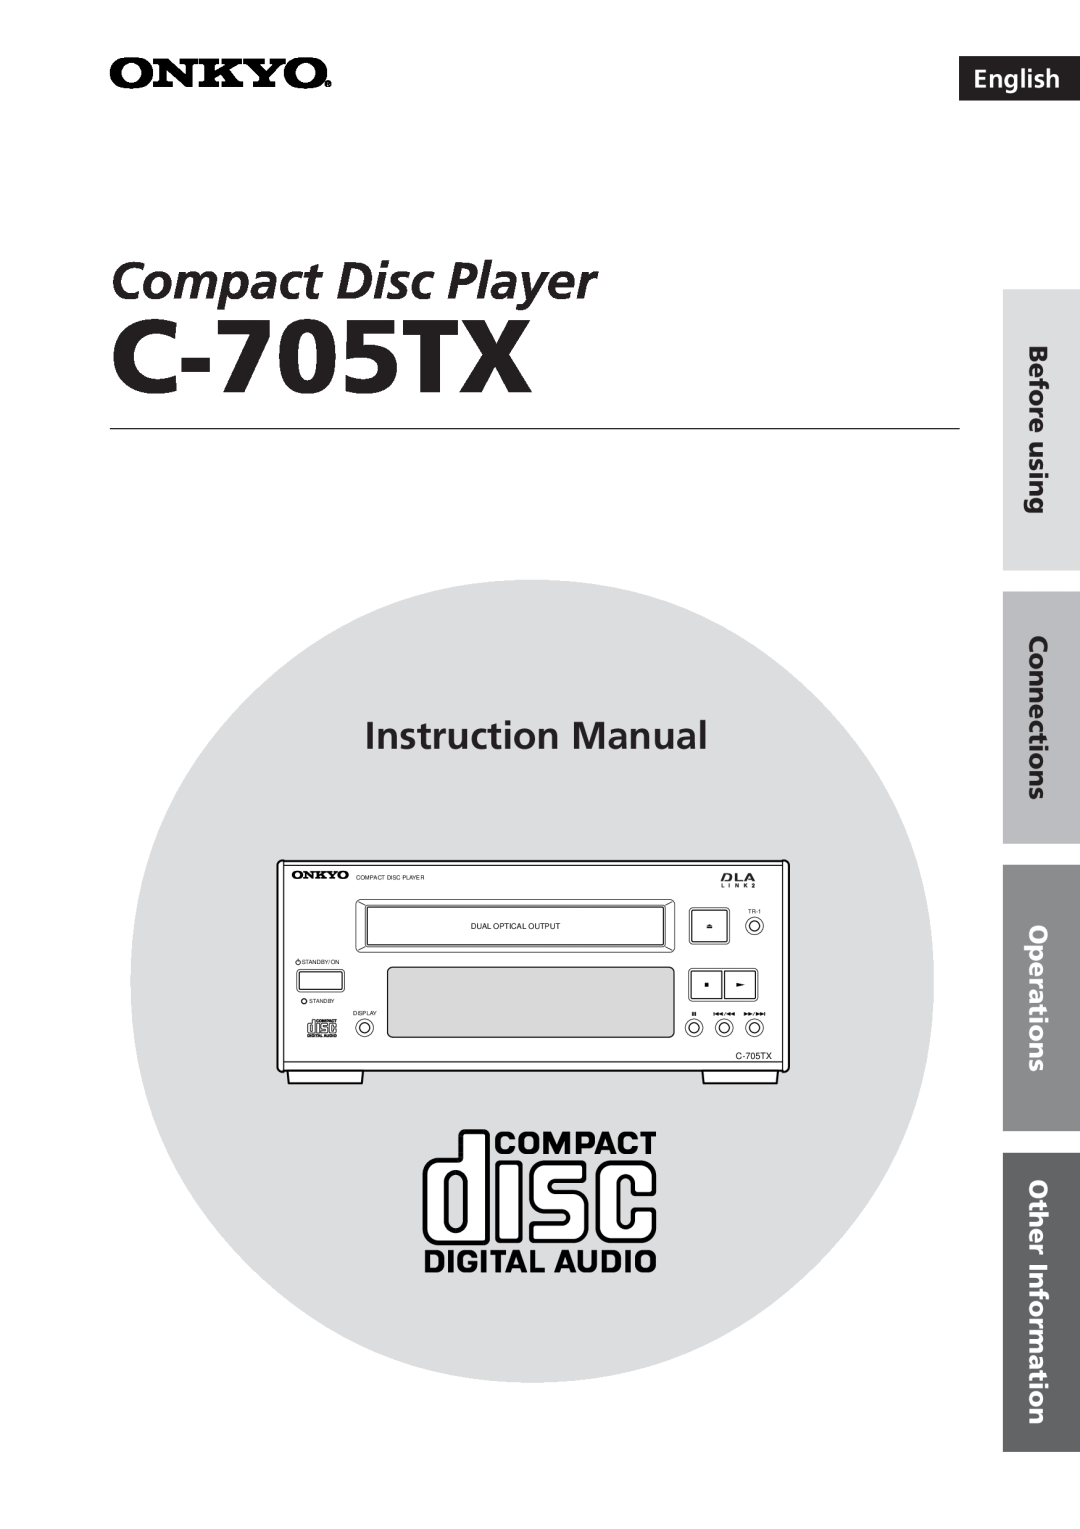 Onkyo C-705TX instruction manual English, Before using Connections, Operations Other Information, Compact Disc Player 